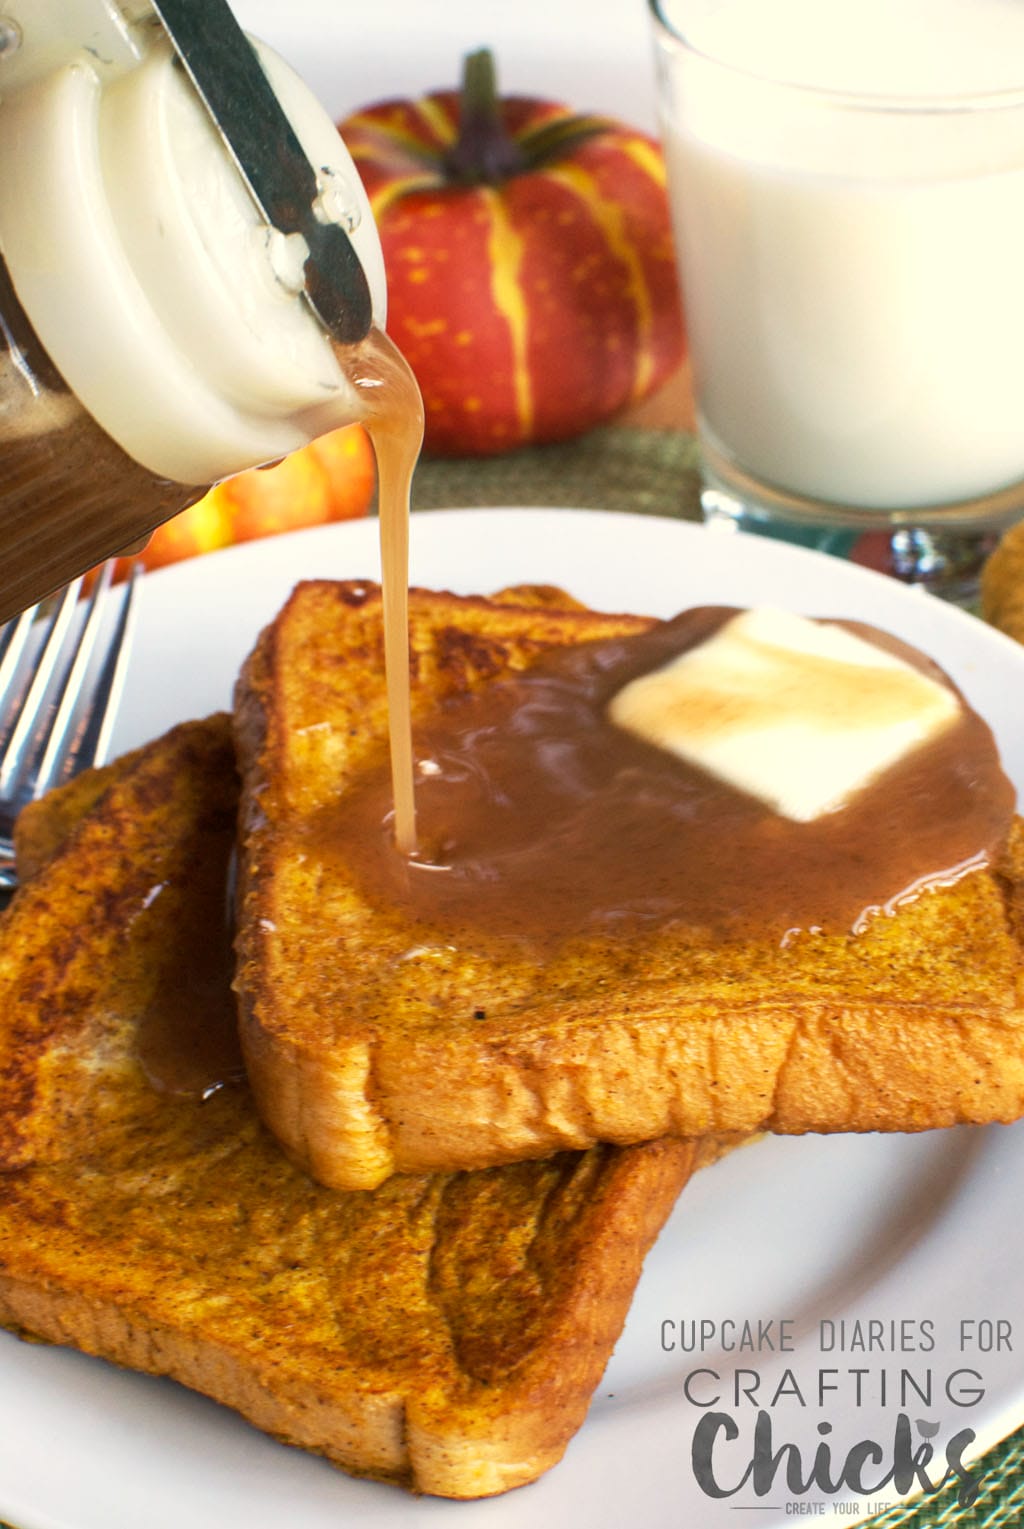 Pumpkin French Toast with Cinnamon Syrup